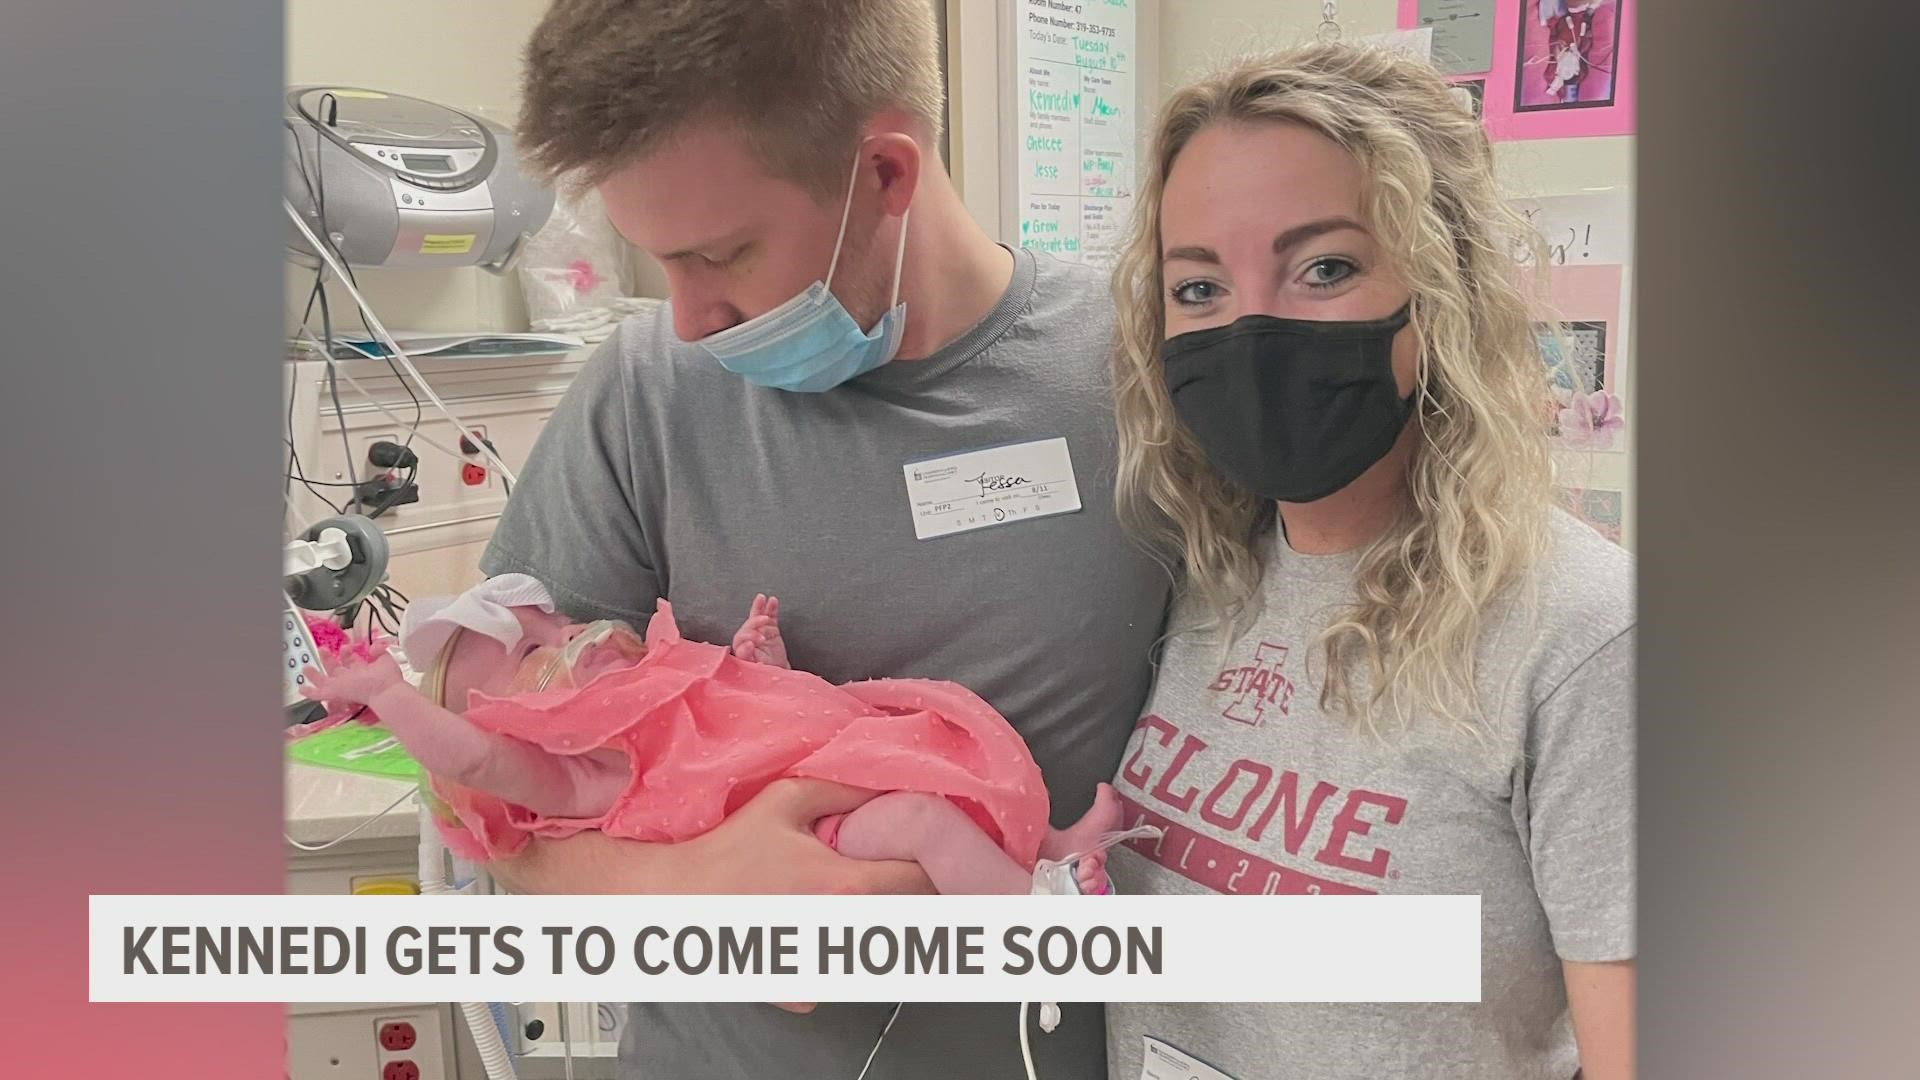 Kennedi's parents Chelcee and Jesse Rathe have spent watching their daughter fight for her life at the University of Iowa Hospital.